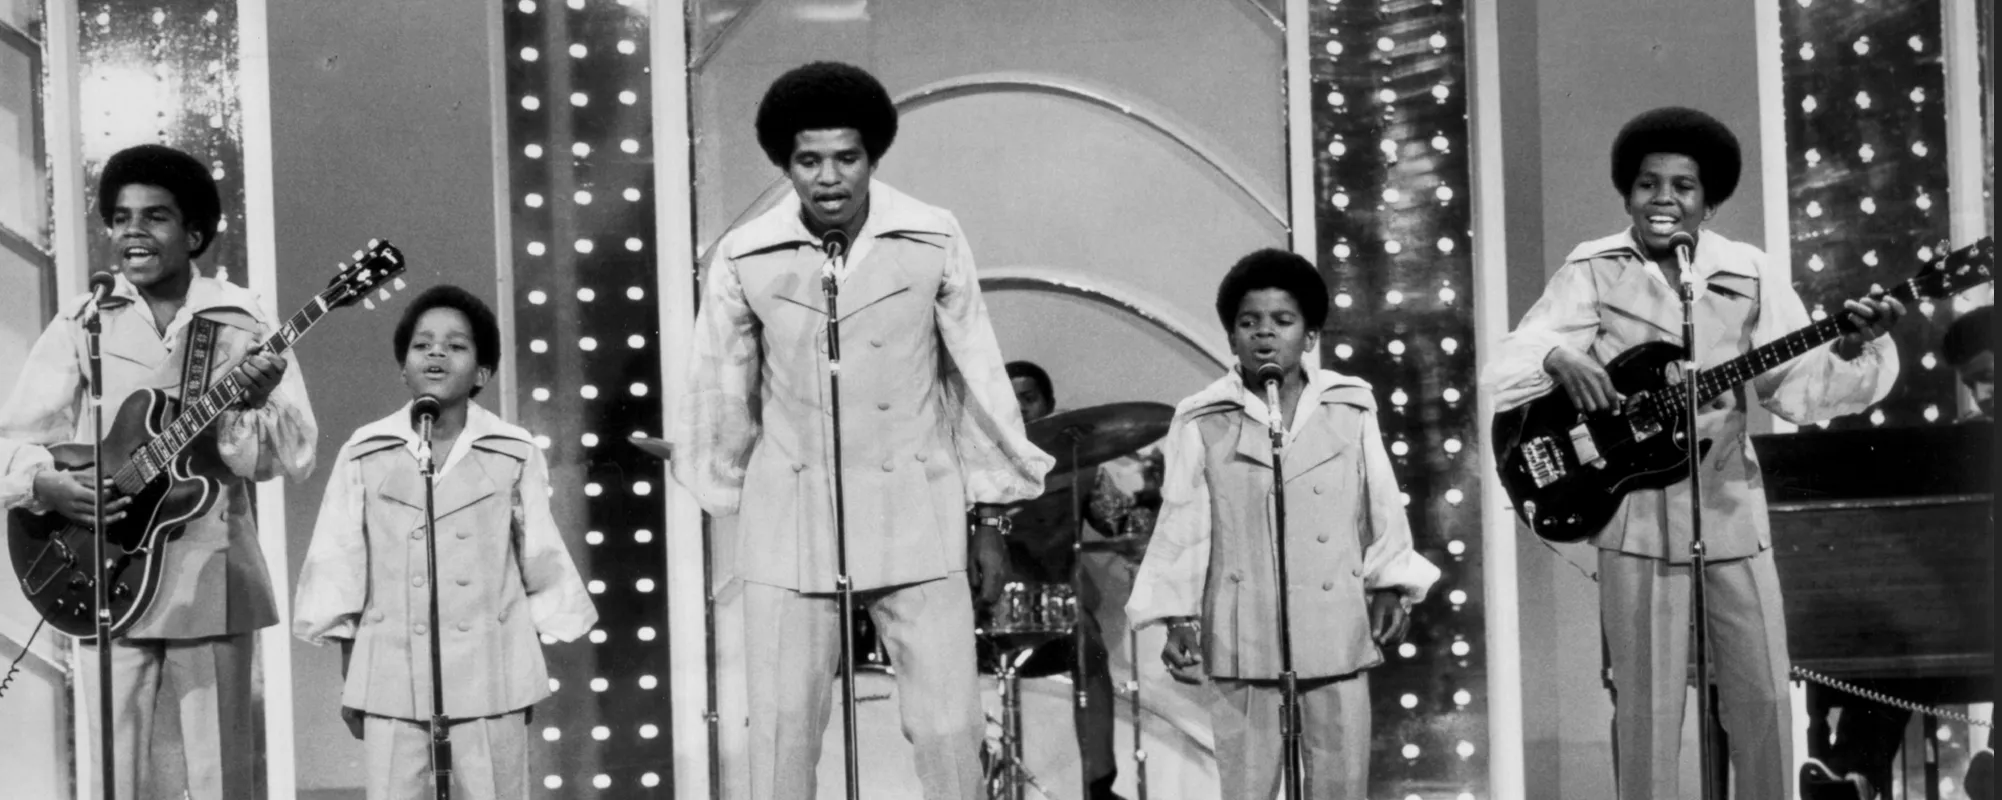 Top 10 Jackson 5 Songs: The Motown Years (1969-1975)